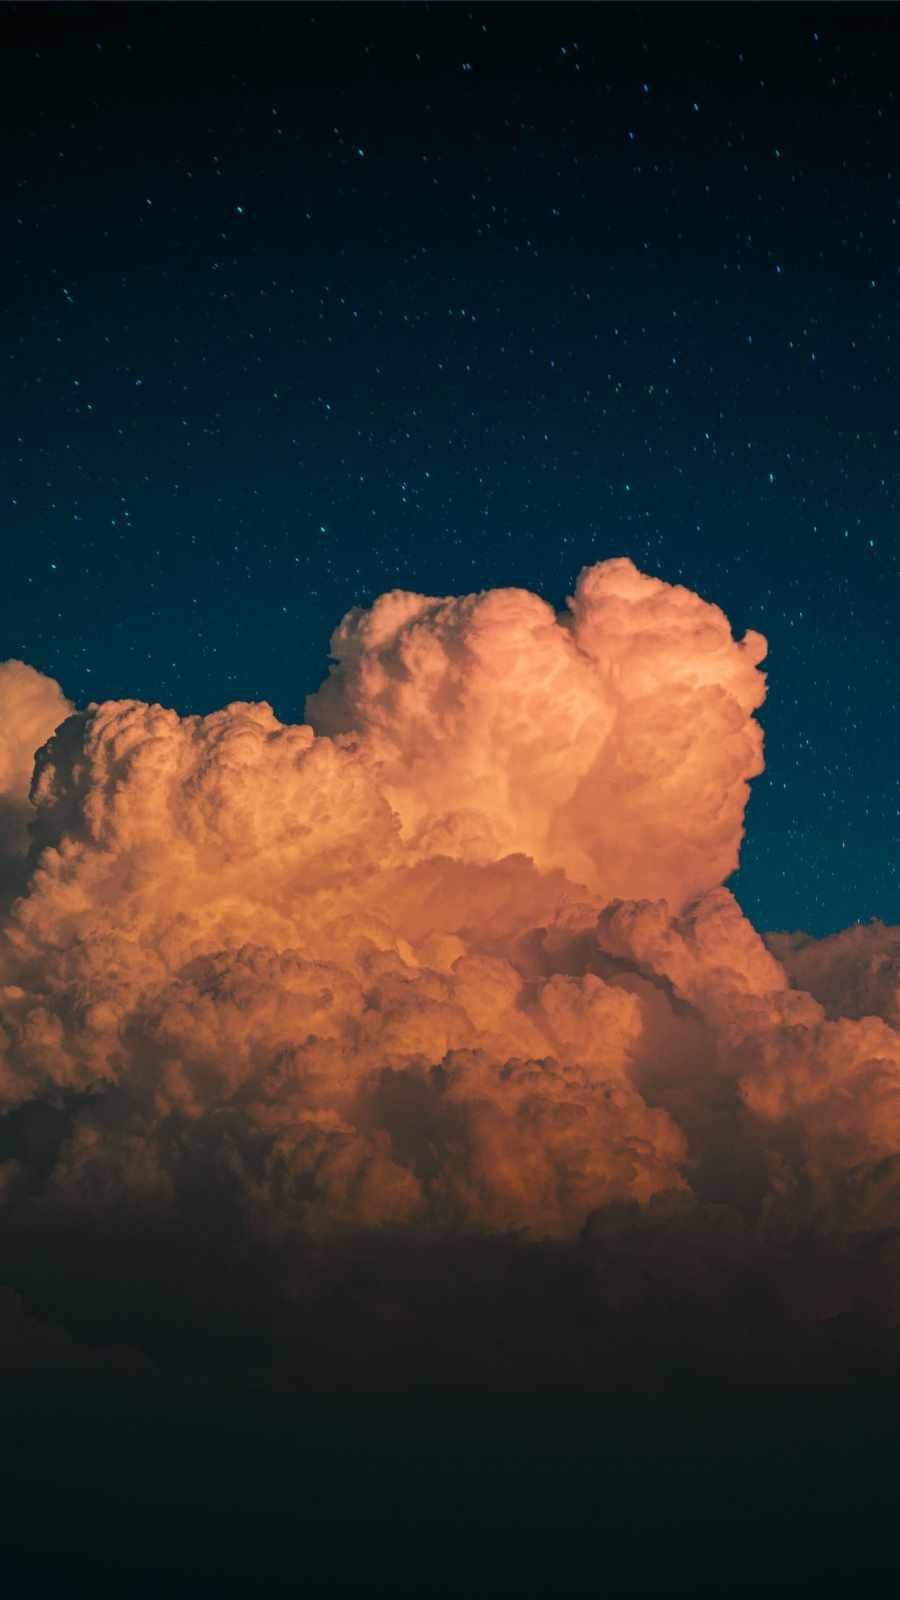 Clouds and stars in the sky - Cloud